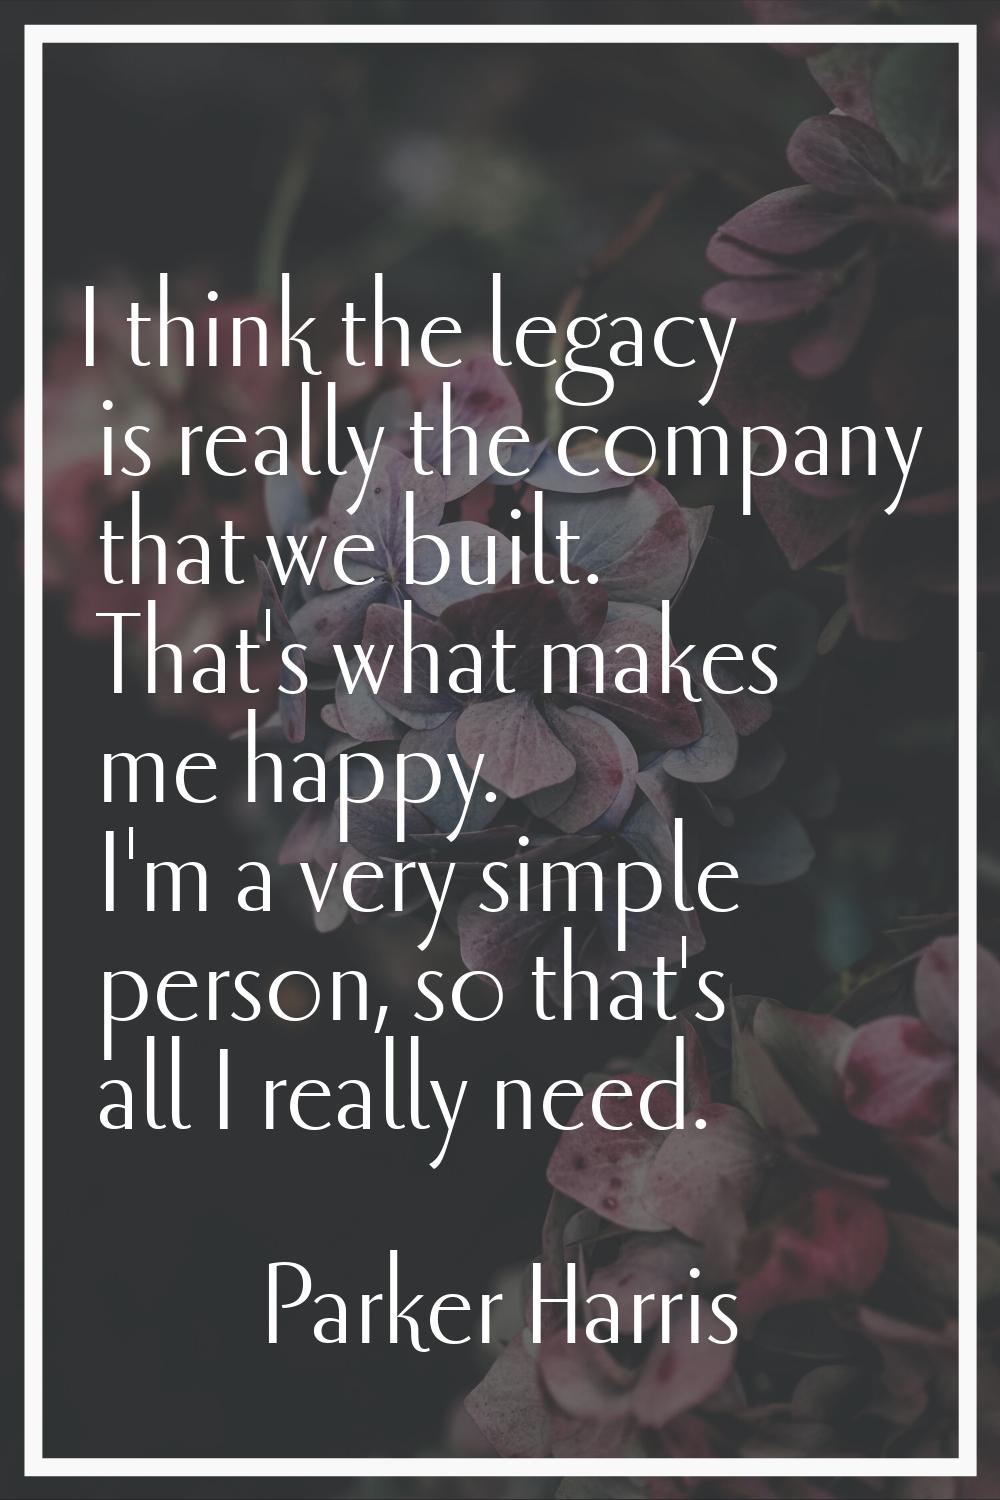 I think the legacy is really the company that we built. That's what makes me happy. I'm a very simp